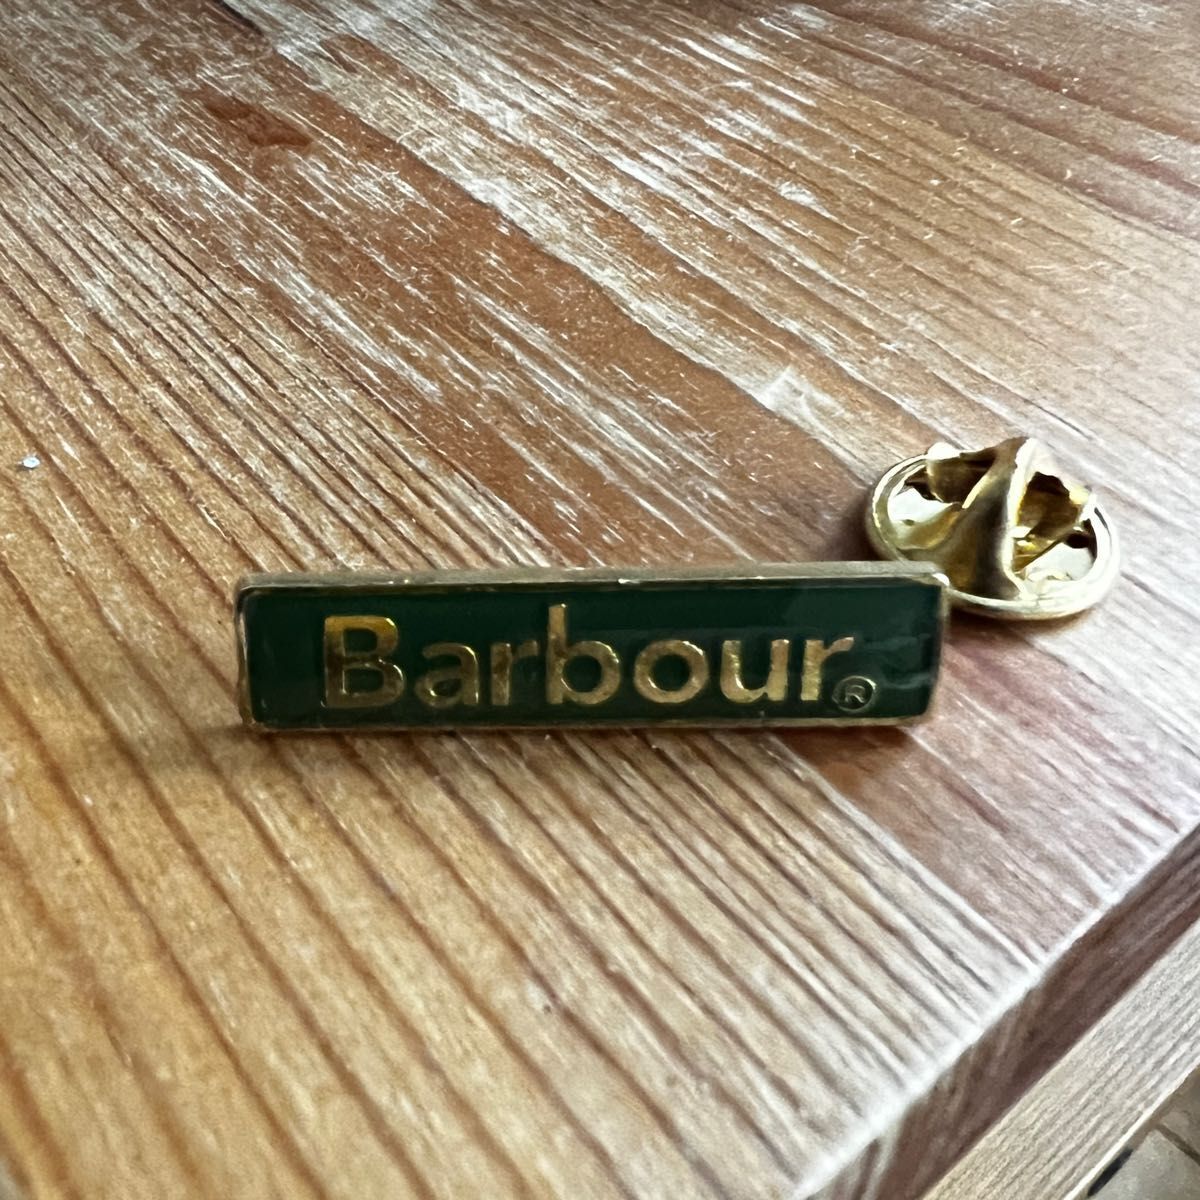 Barbour Barbour pin badge pins